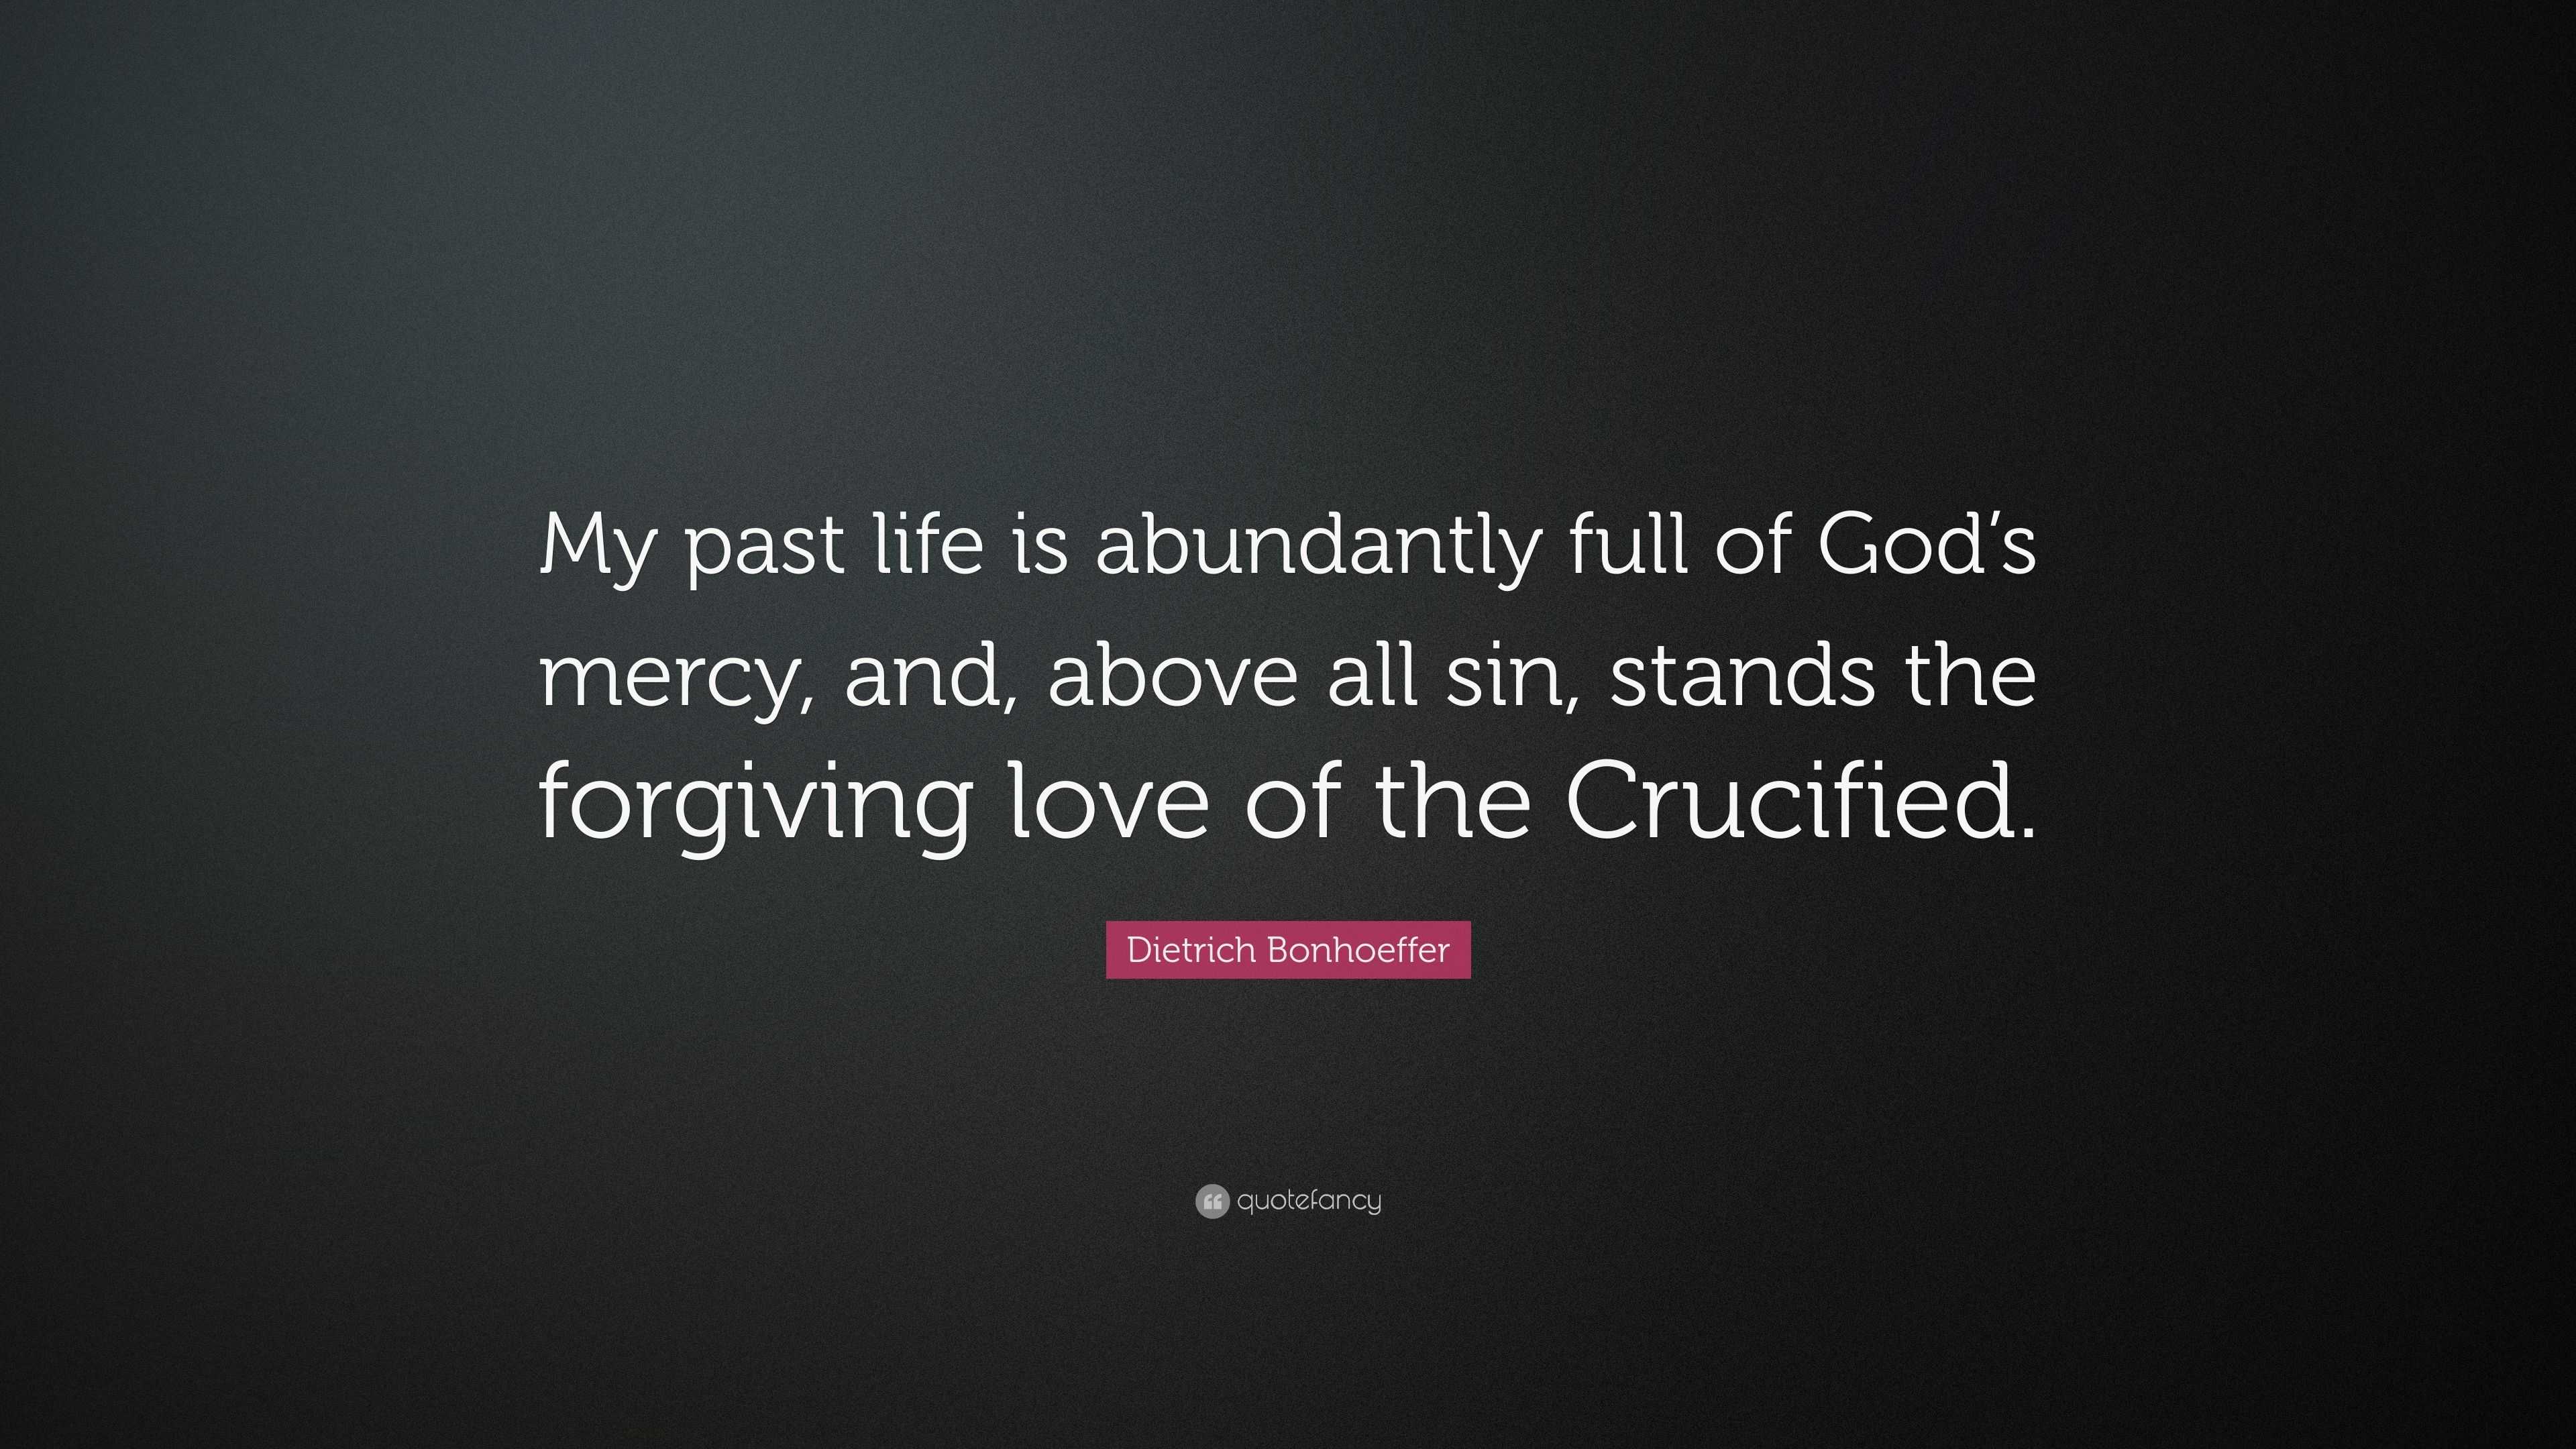 Dietrich Bonhoeffer Quote “My past life is abundantly full of God s mercy and